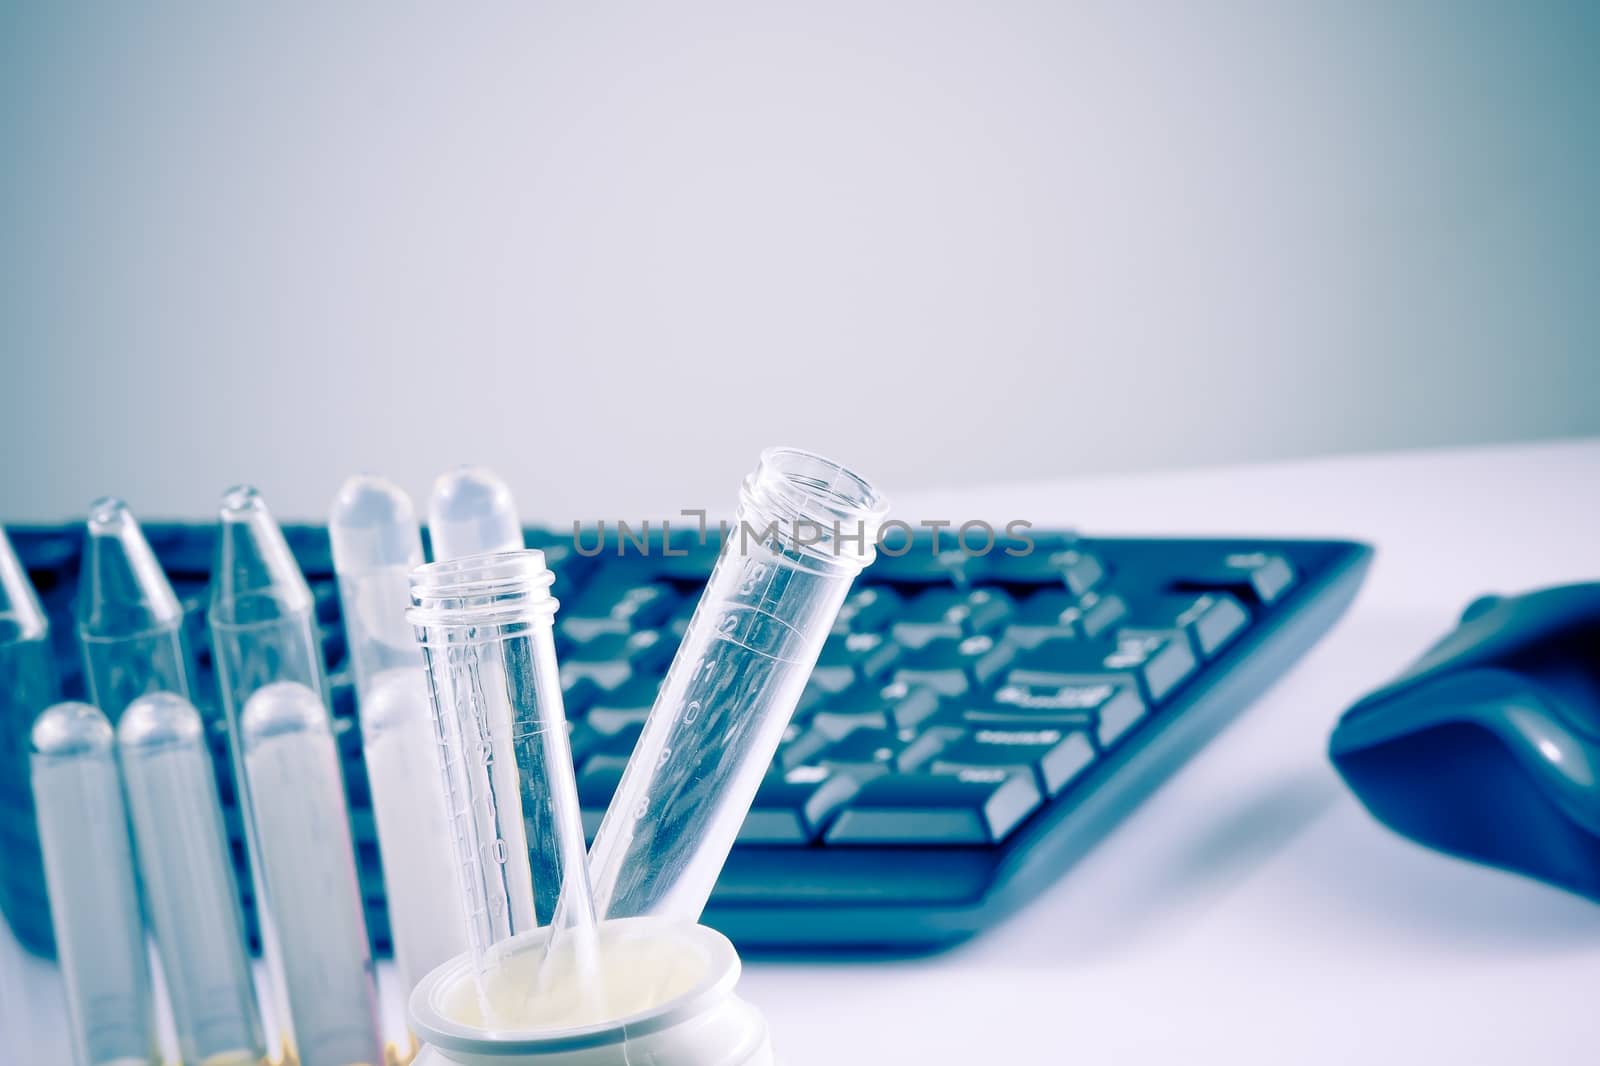 test tubes in laboratory on table near computer keyboard and mouse by donfiore